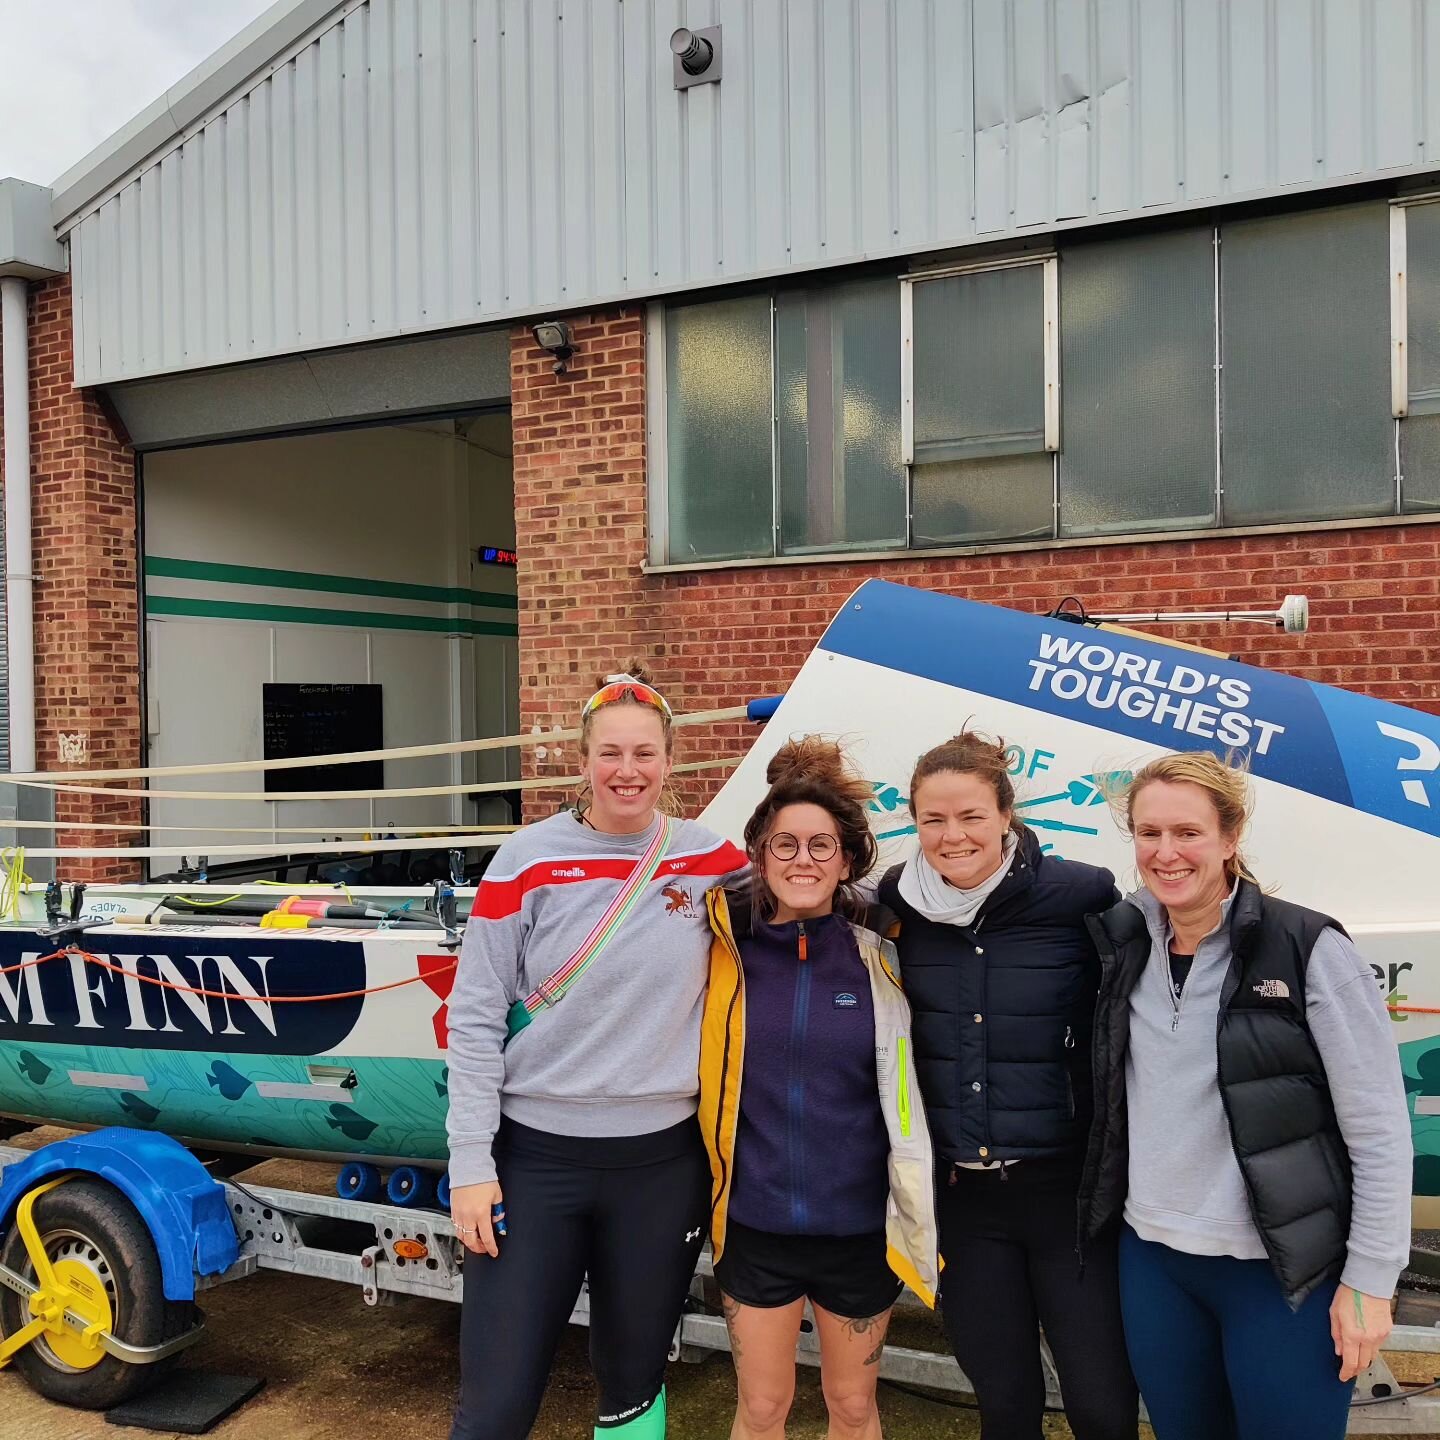 Full team reunited with the 5th team member, SS1 💙. We've given her a thorough clean out, and now we have a few events left to take her to before we hand her over to @team_deadlegz for their @worlds.toughest.row #Atlantic2025 crossing. We're going t